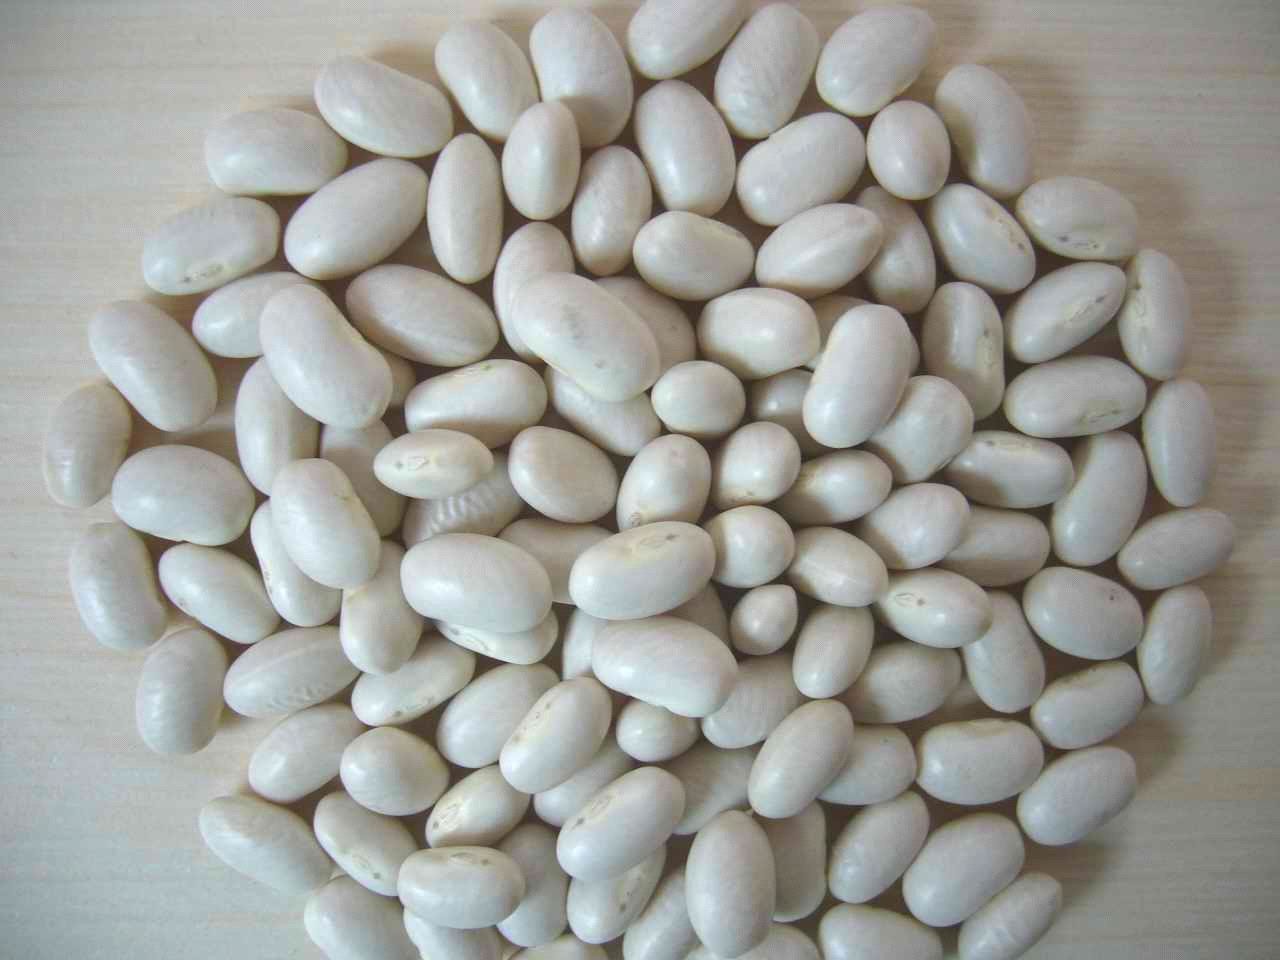 Best Good quality organic White Kidney Beans for good Price wholesale